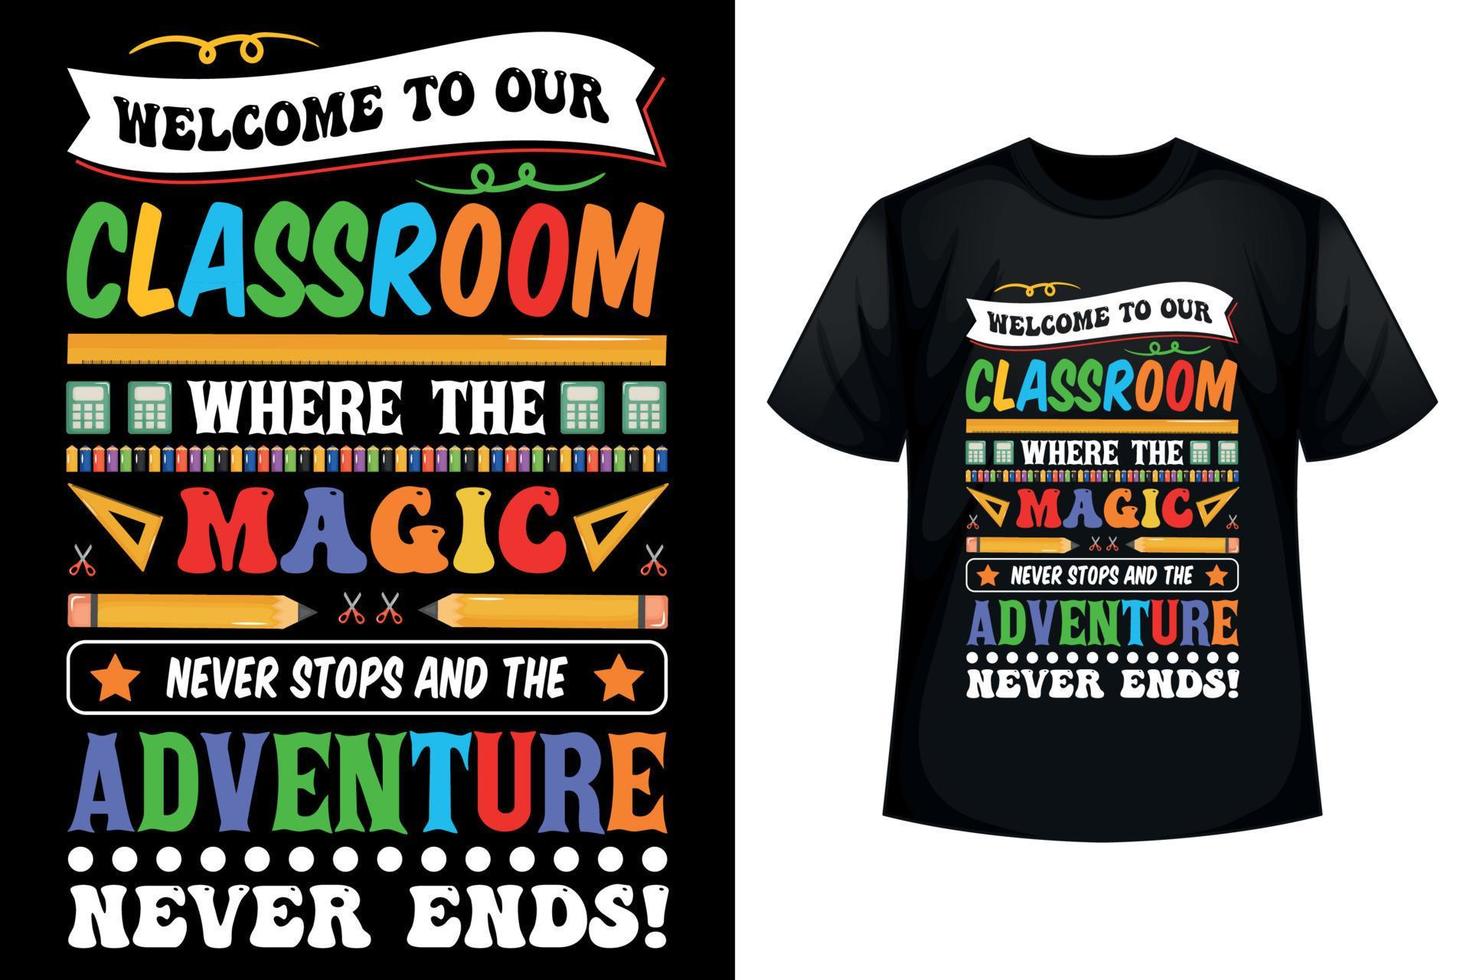 Welcome to our classroom where the magic never stops and the adventure never ends - Back to school t-shirt vector